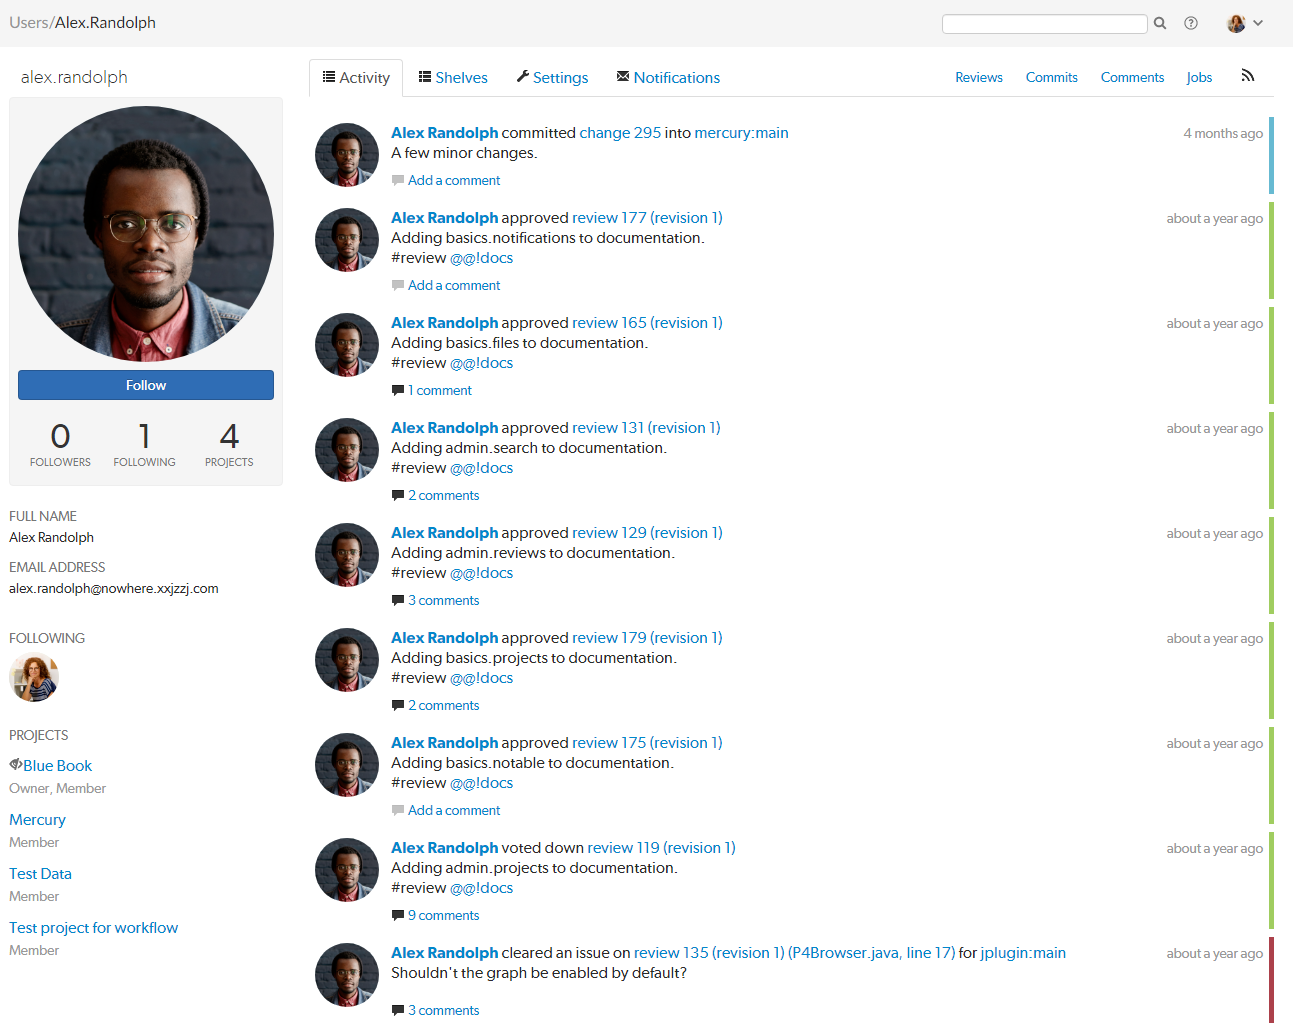 Image of Another User's Profile page